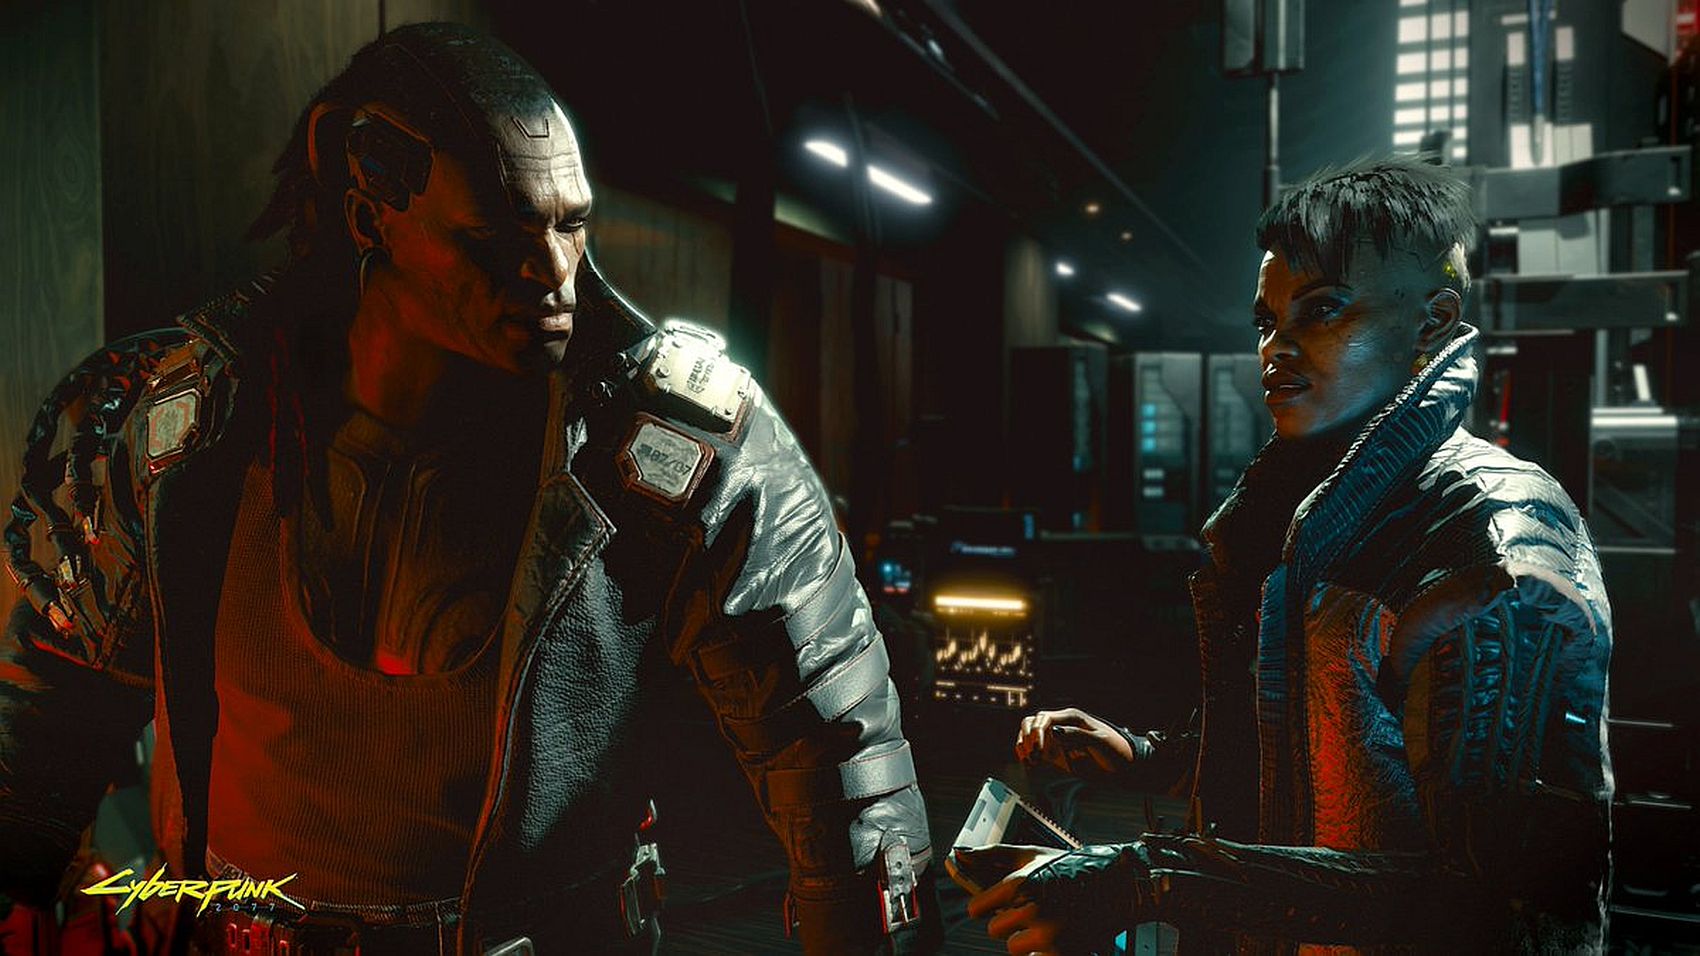 Image for “Story goes first with everything”, but CD Projekt never had combat designers until Cyberpunk 2077